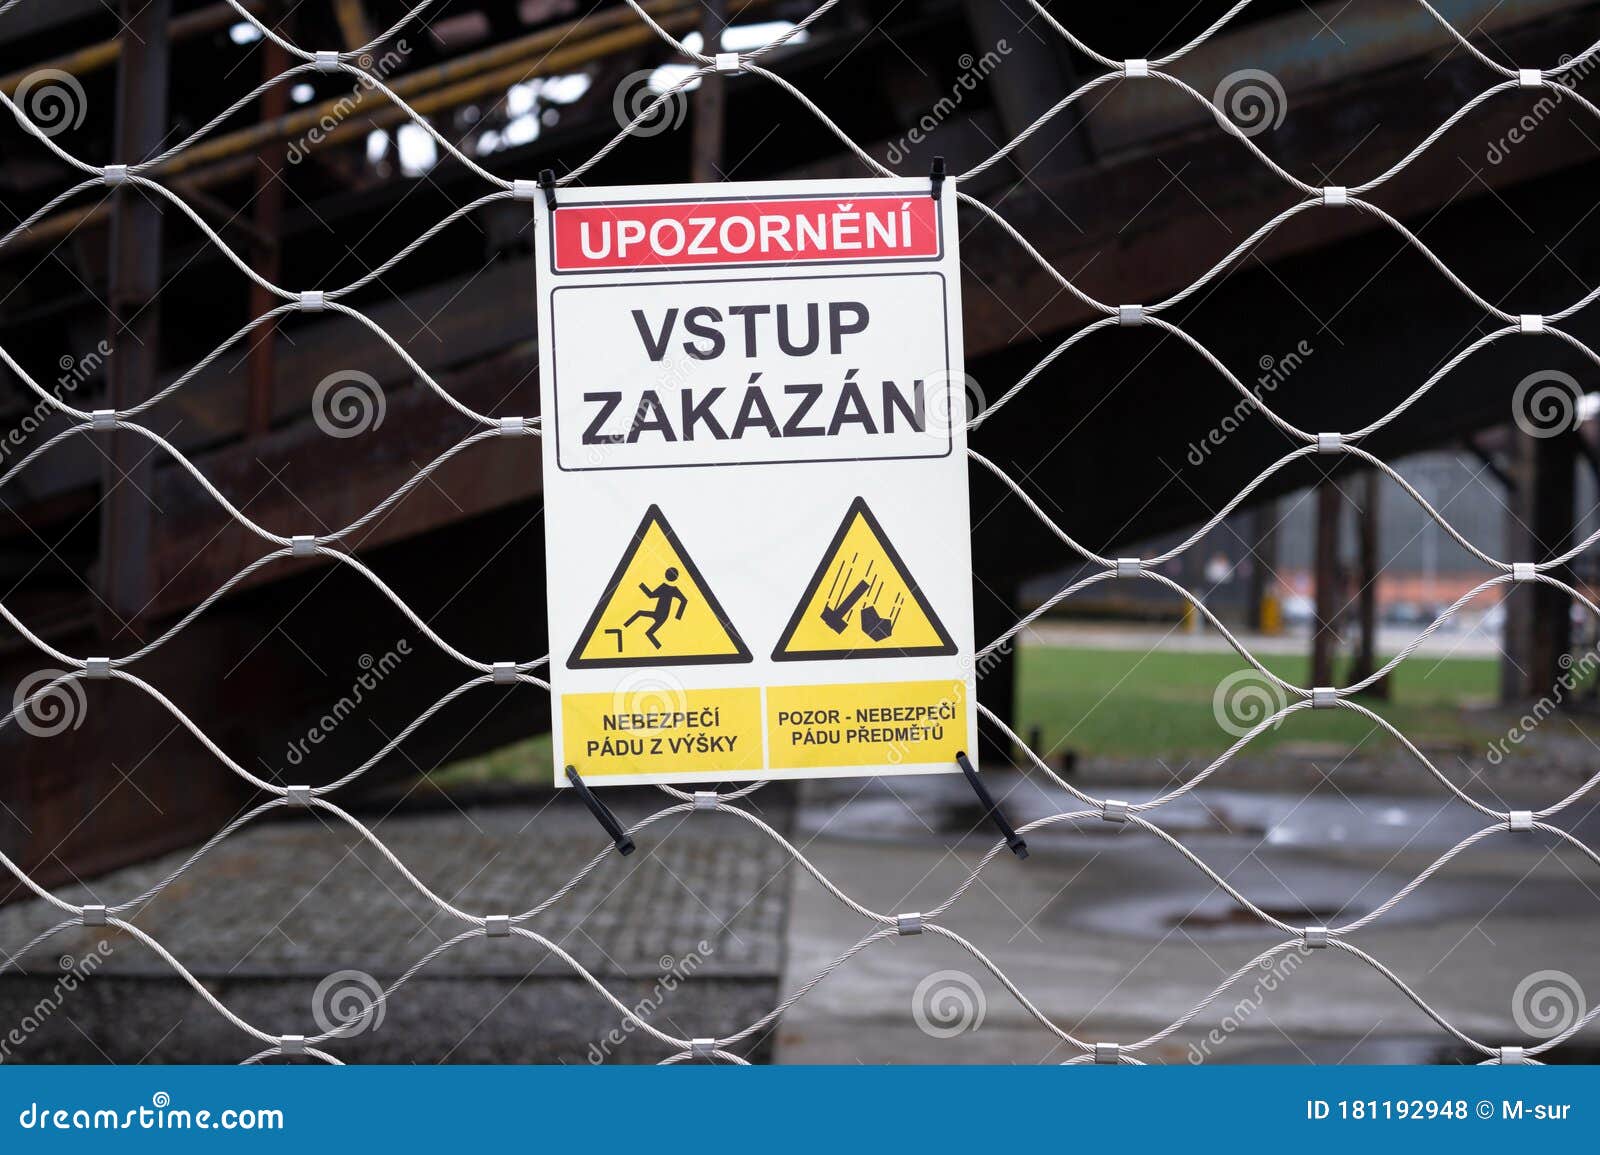 warning sign with text translation from czech language: caution: no admittance.